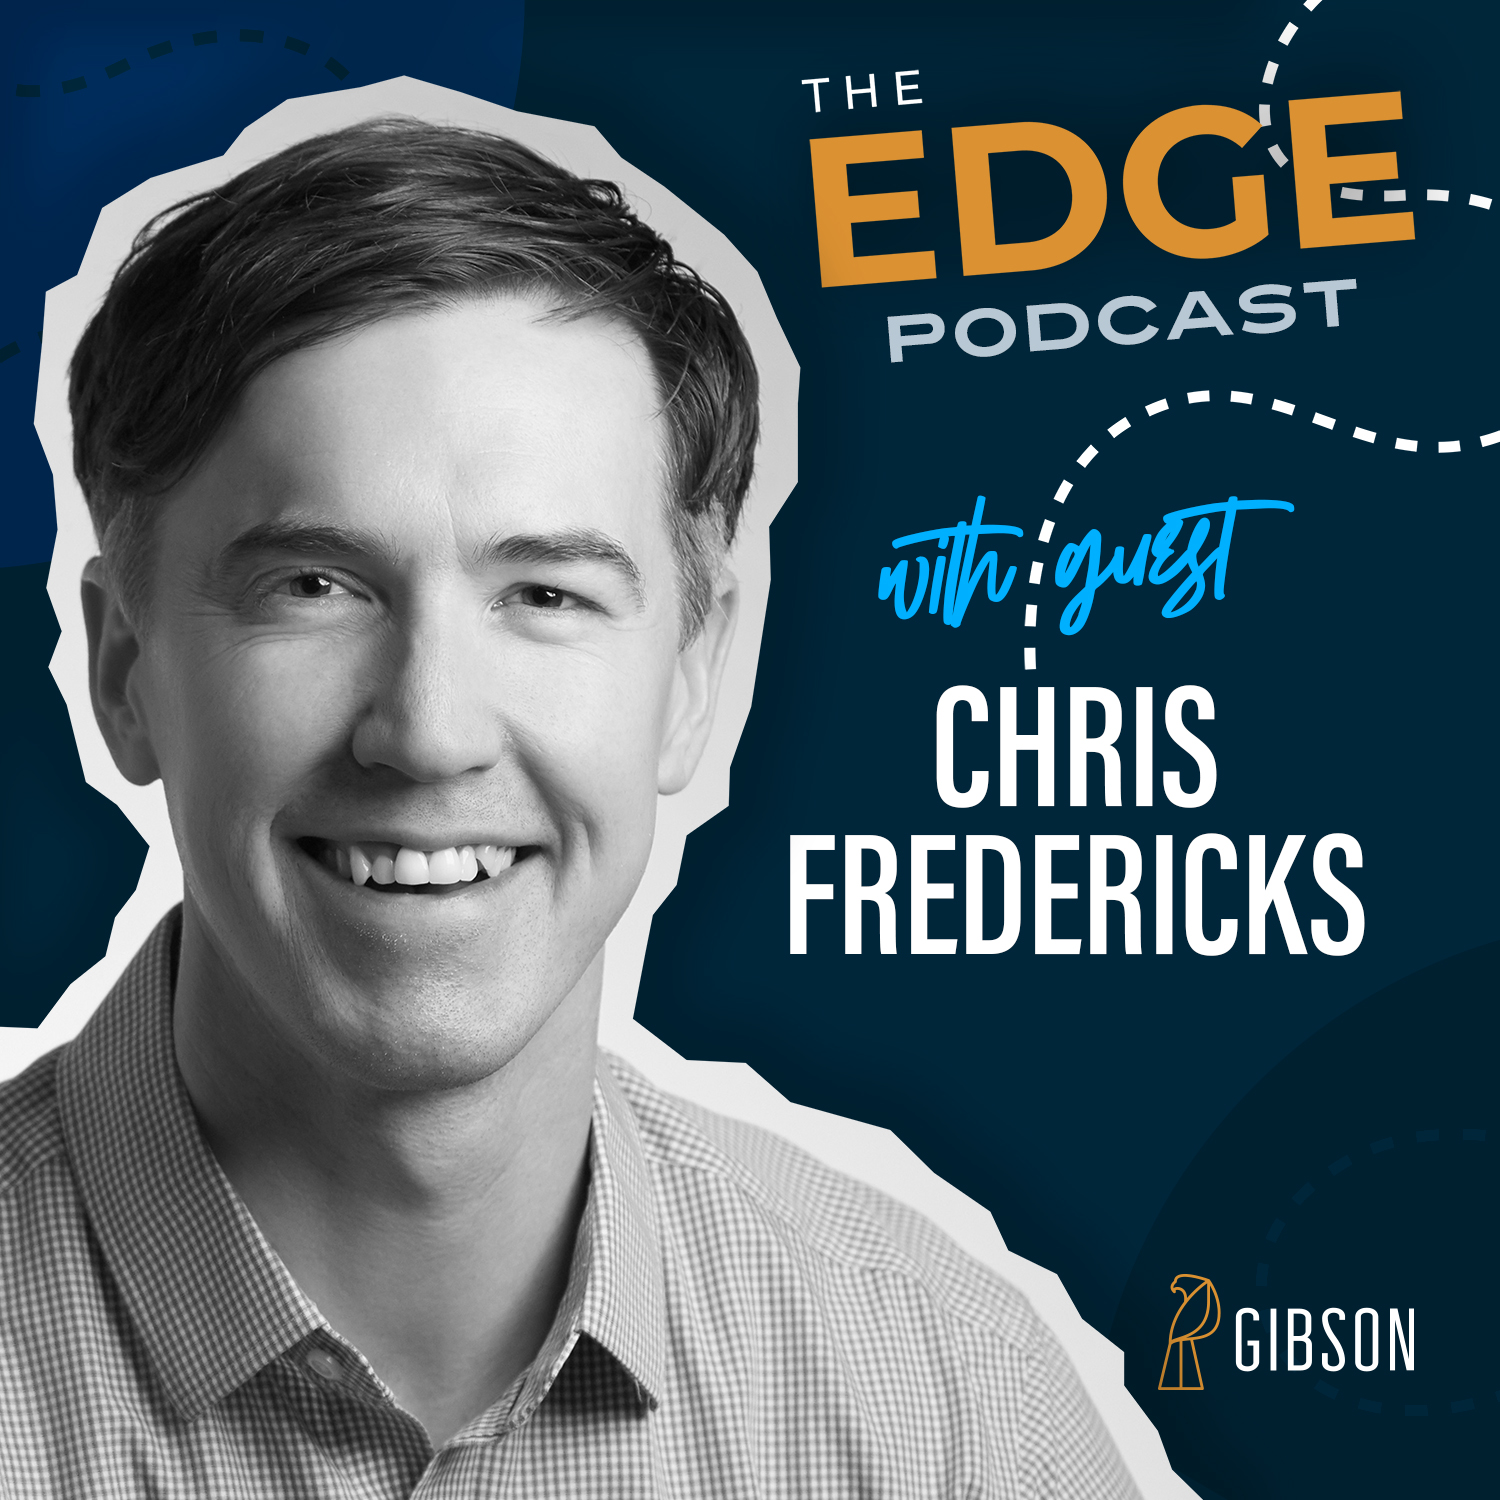 Chris Fredericks discusses ESOPs and empowering employees